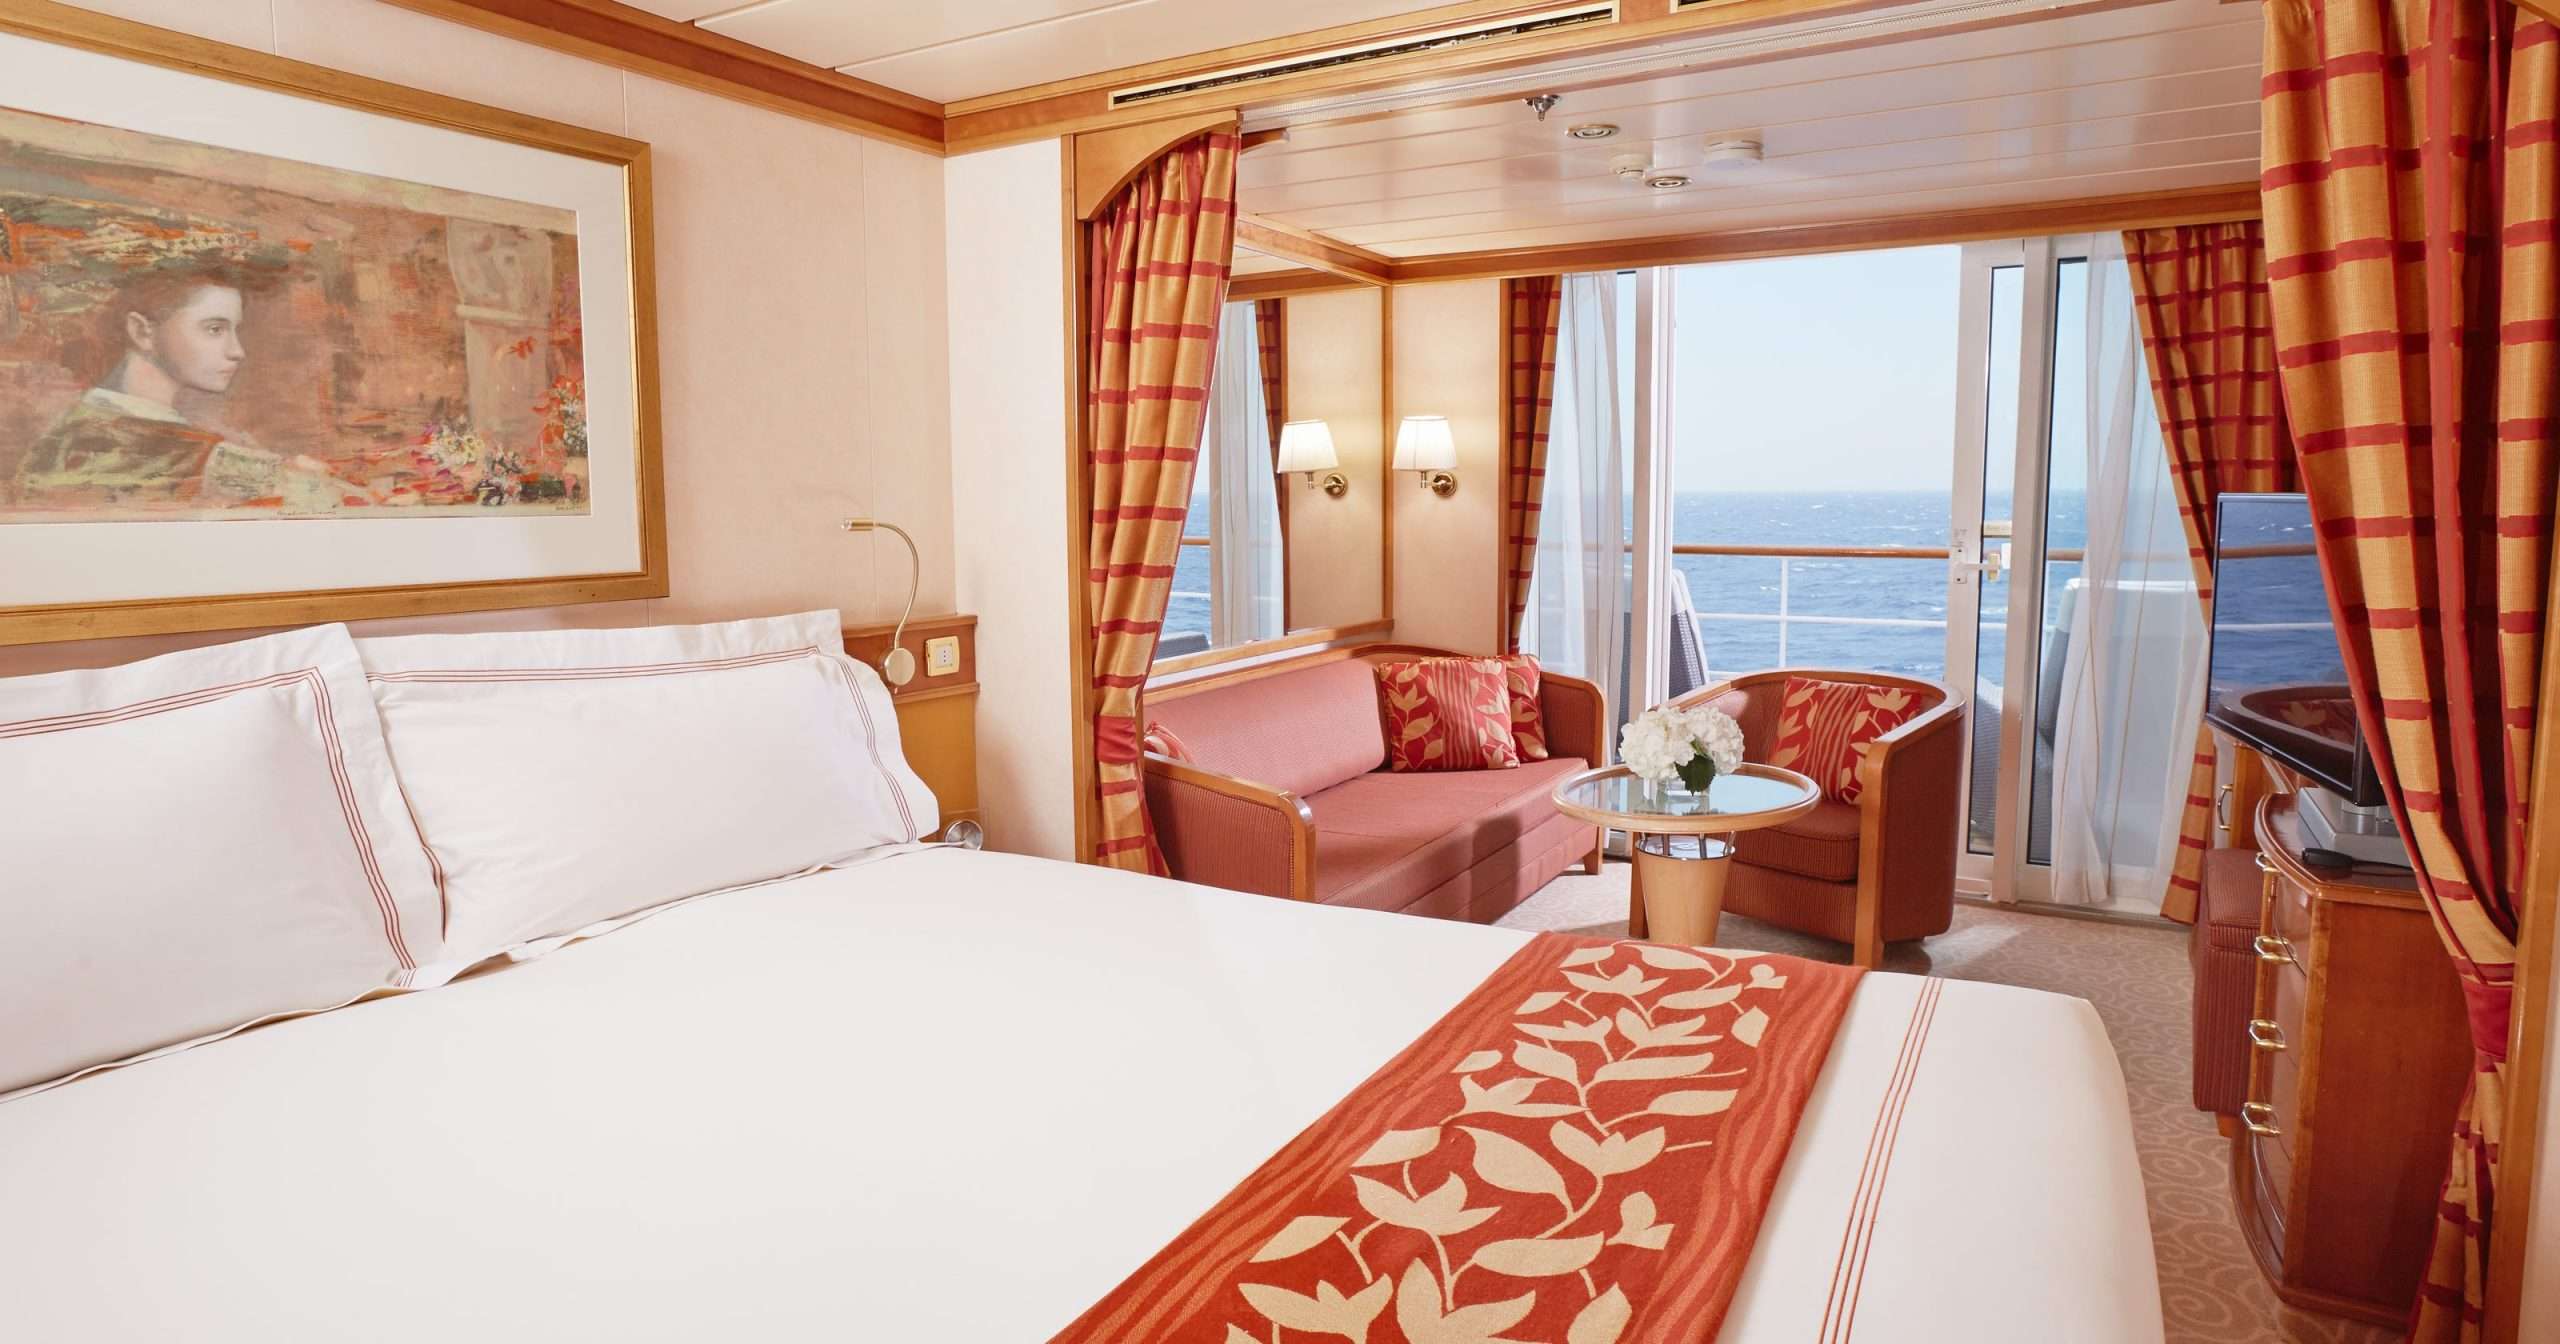 Inside some of the most luxurious cruise ship suites